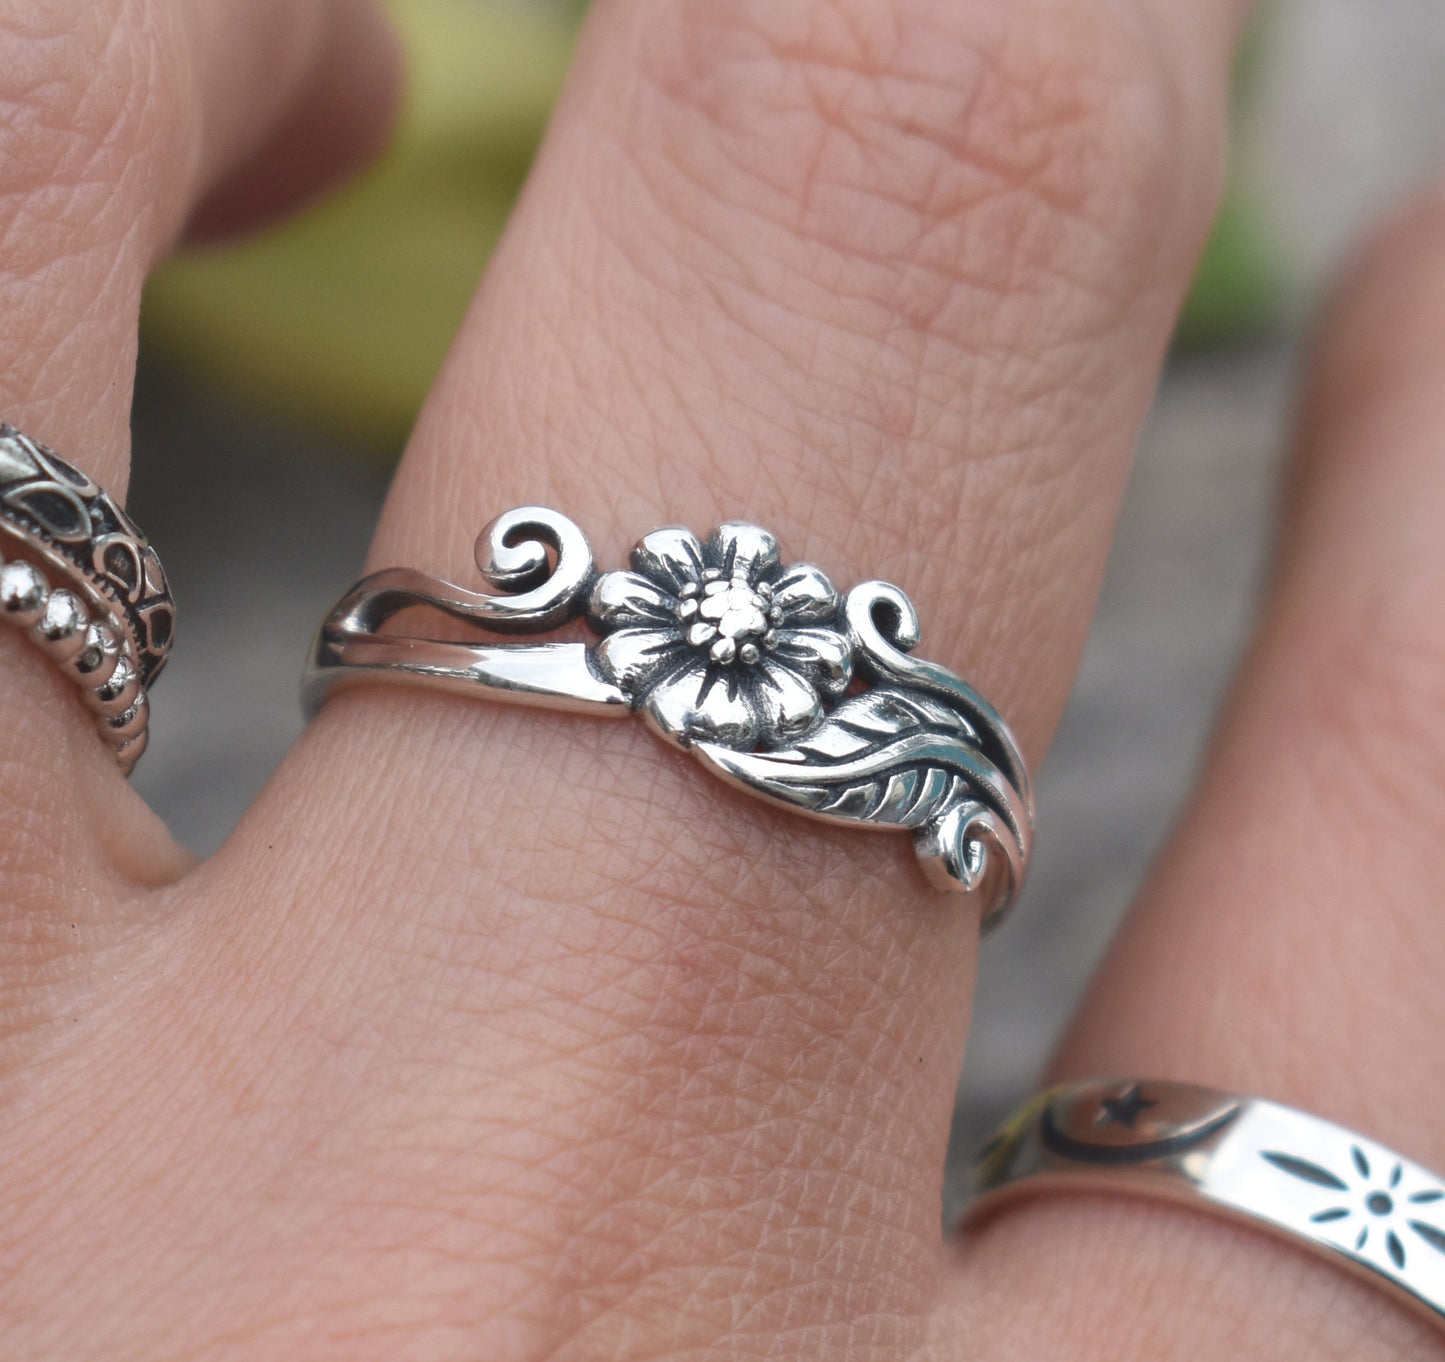 Flower Ring- Floral Ring, Daisy Ring, Y2k Ring- Cottagecore-Sterling Silver Ring